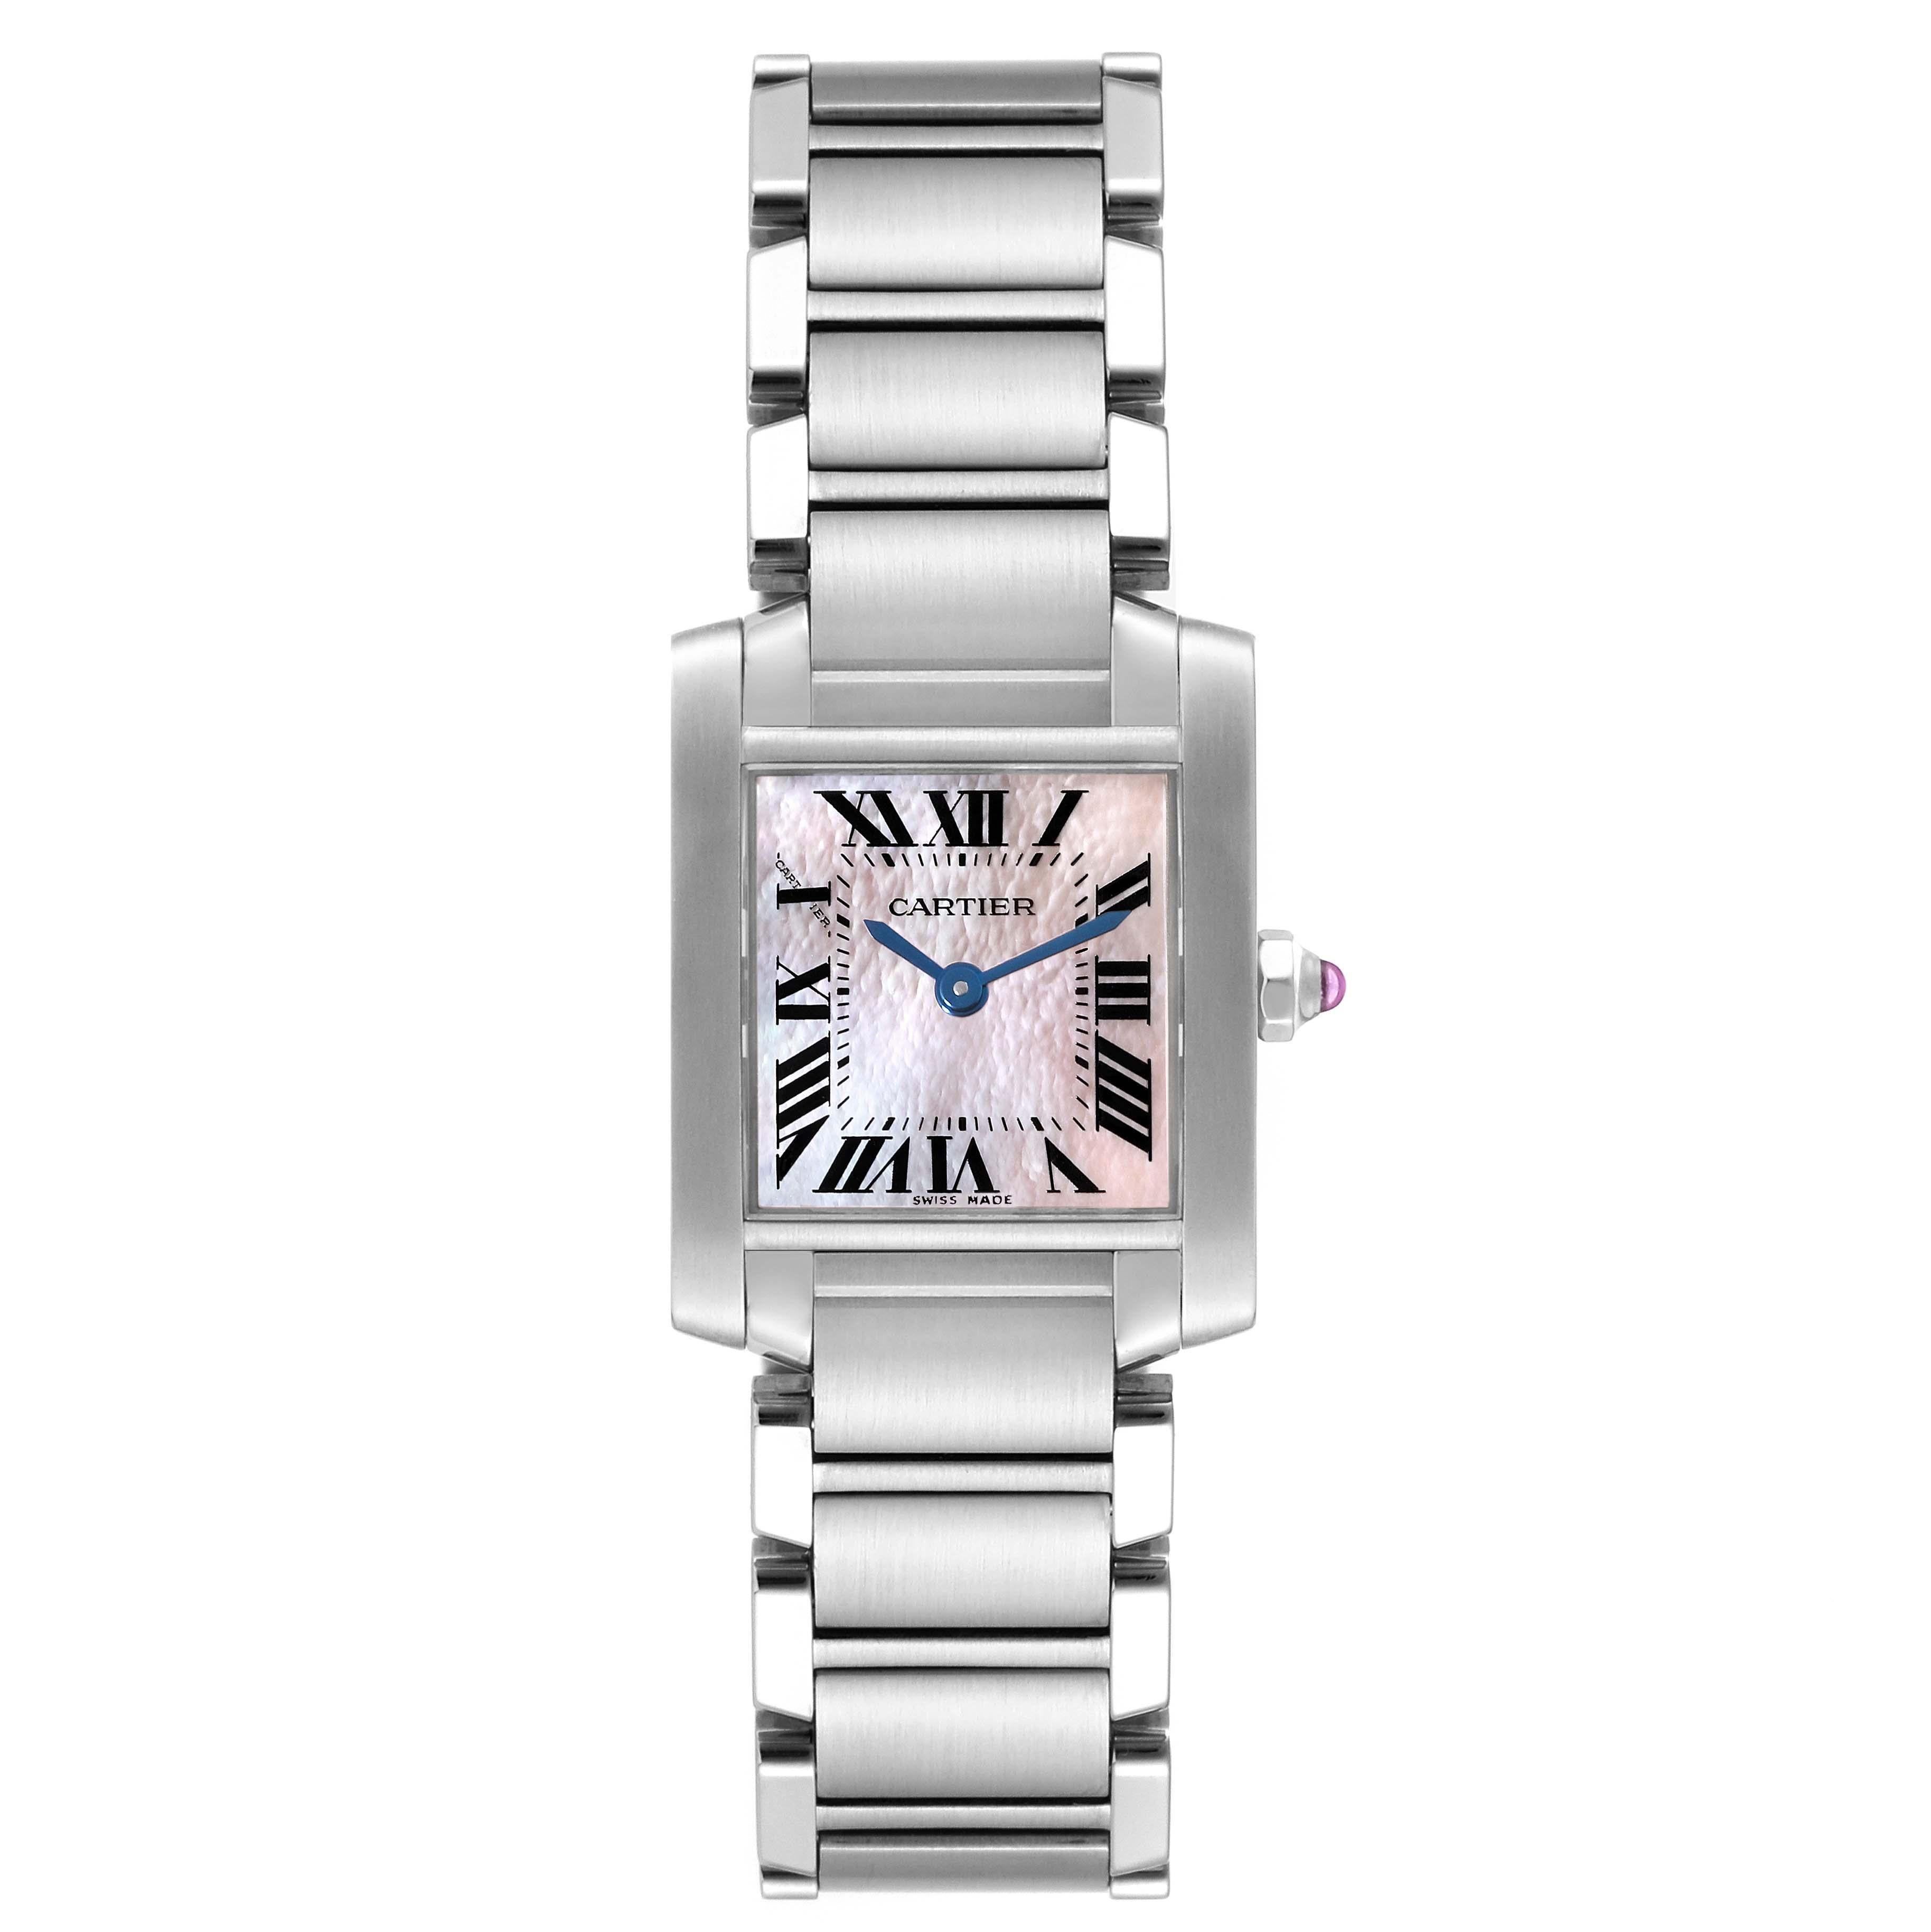 Cartier Tank Francaise Pink Mother of Pearl Steel Ladies Watch W51028Q3 Papers. Quartz movement. Rectangular stainless steel 20.0 x 25.0 mm case. Octagonal crown set with a pink spinel cabochon. . Scratch resistant sapphire crystal. Pink mother of